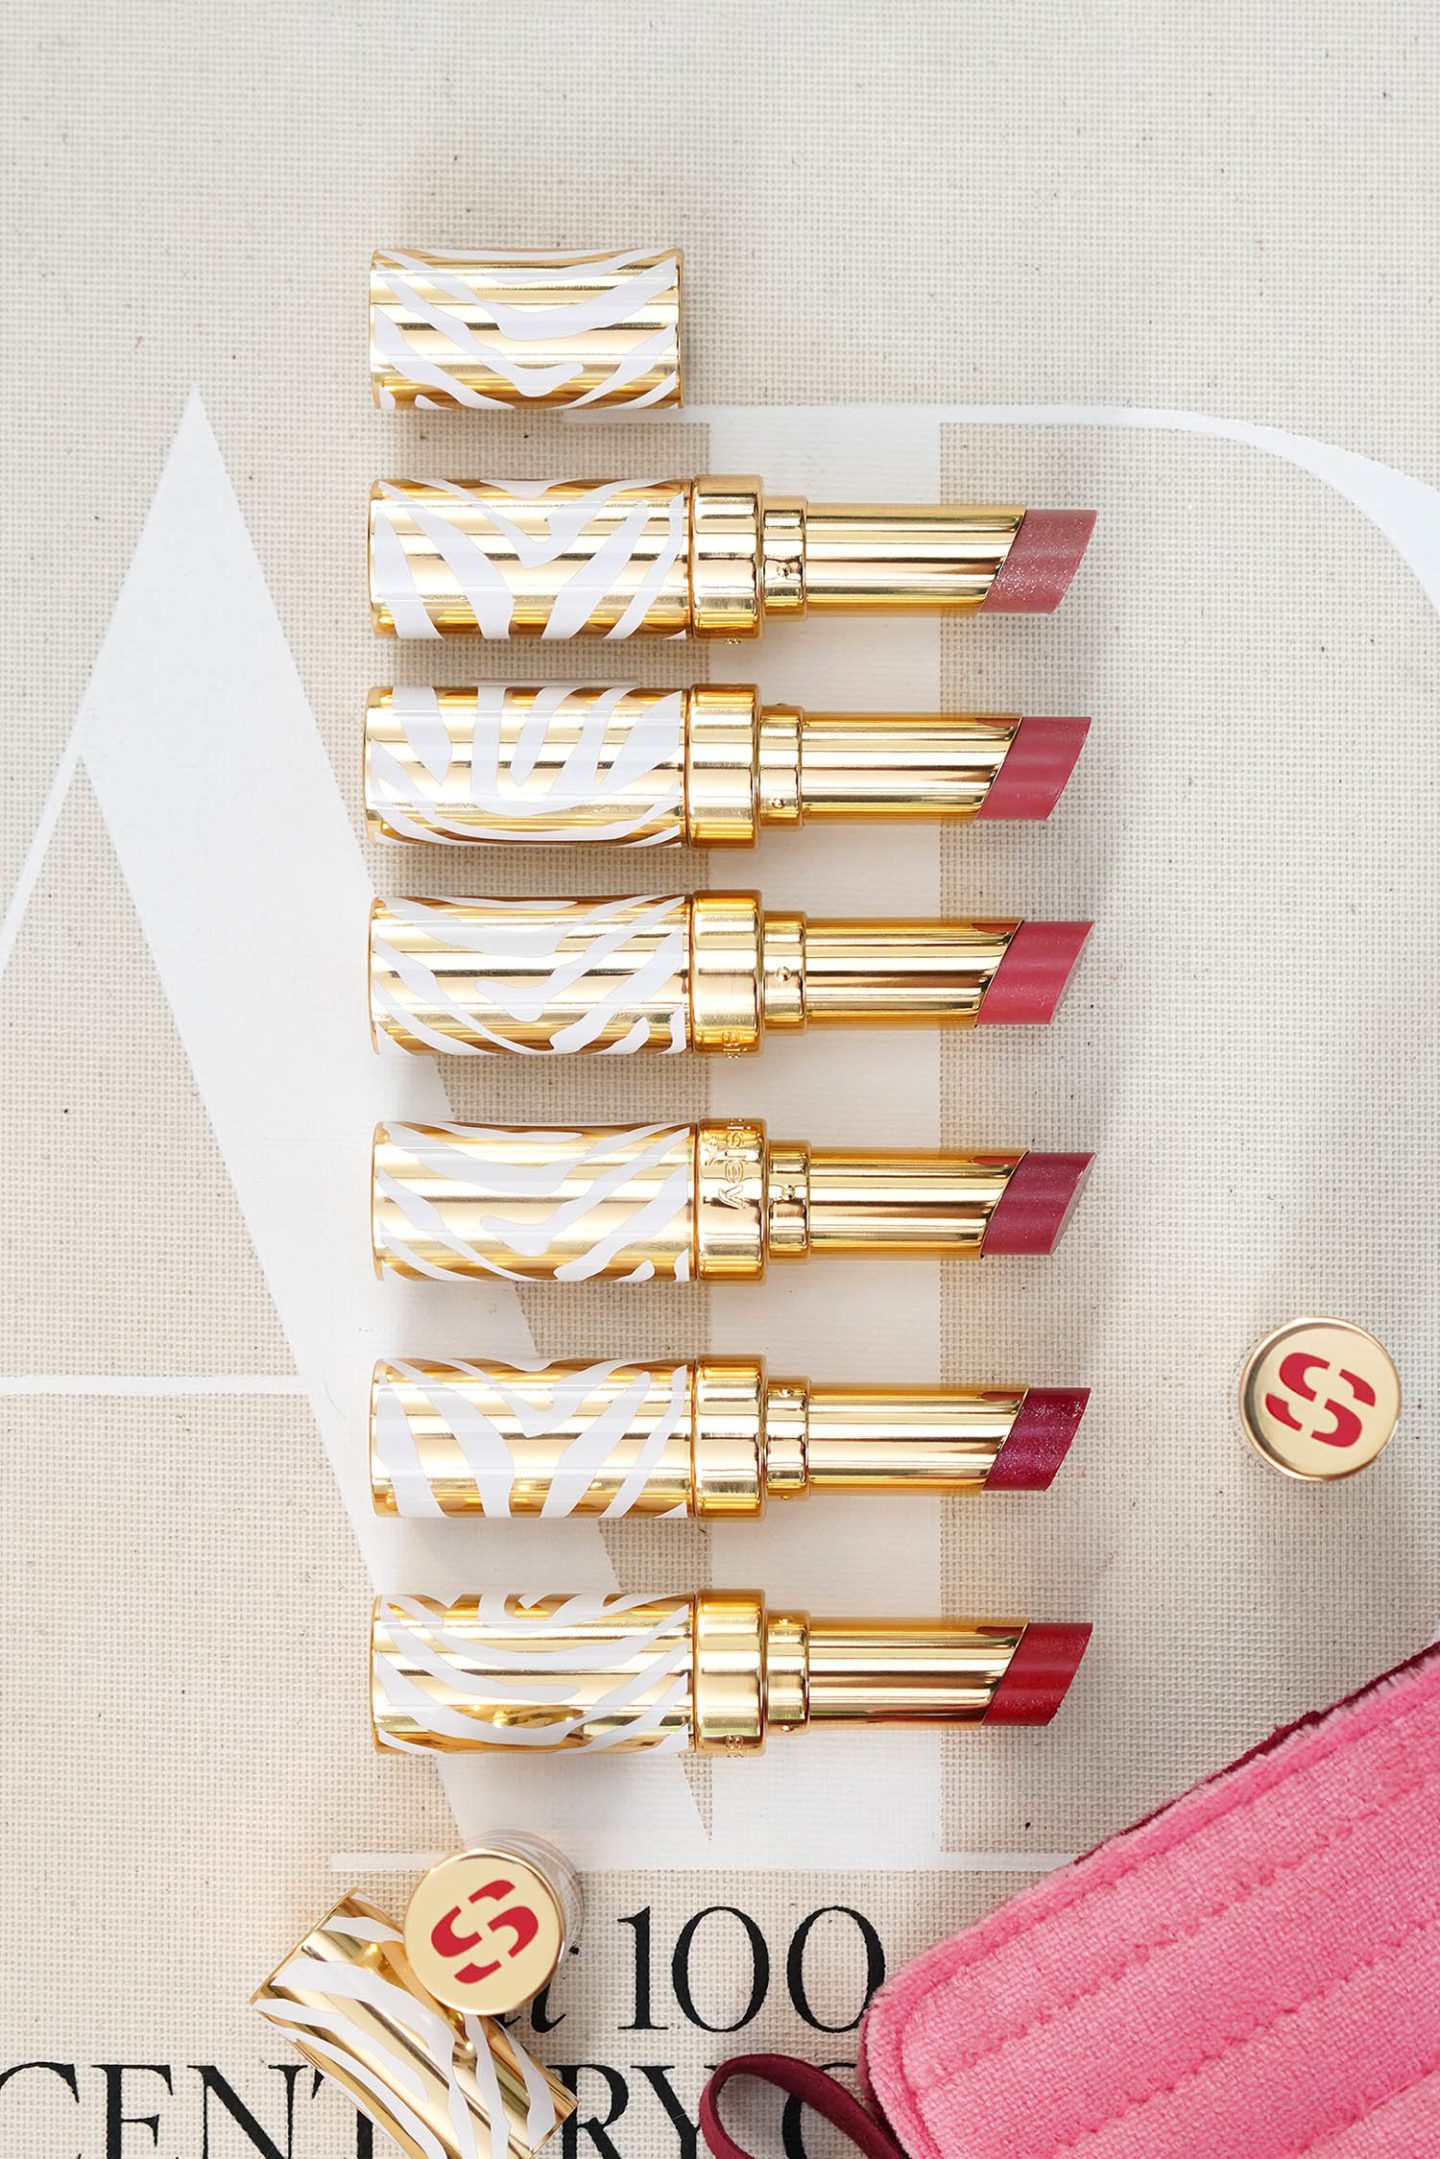 Sisley Phyto-Rouge Shine Refillable Lipstick Review